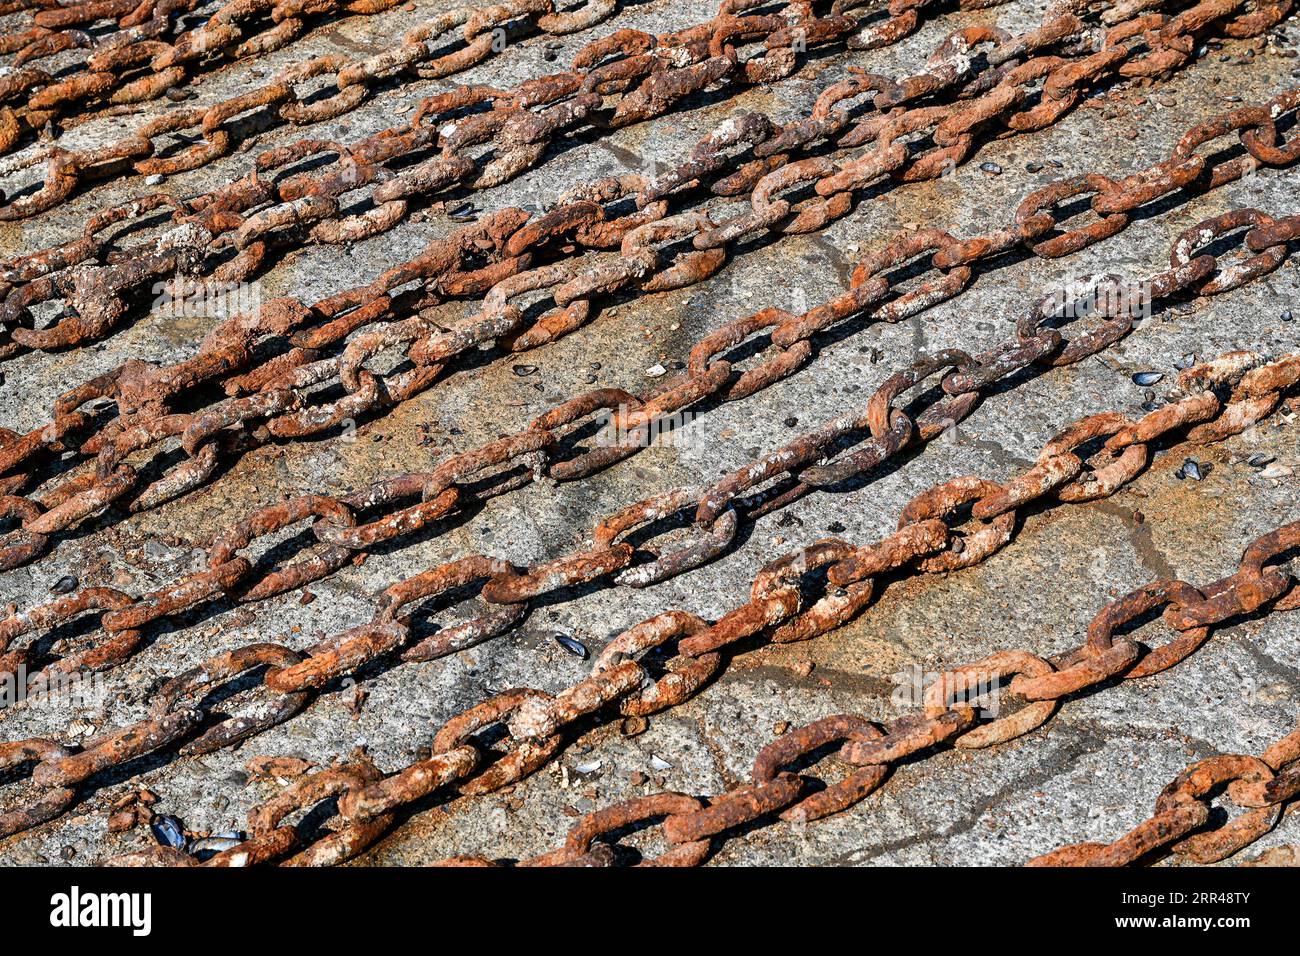 rows of rusty anchor chain Stock Photo